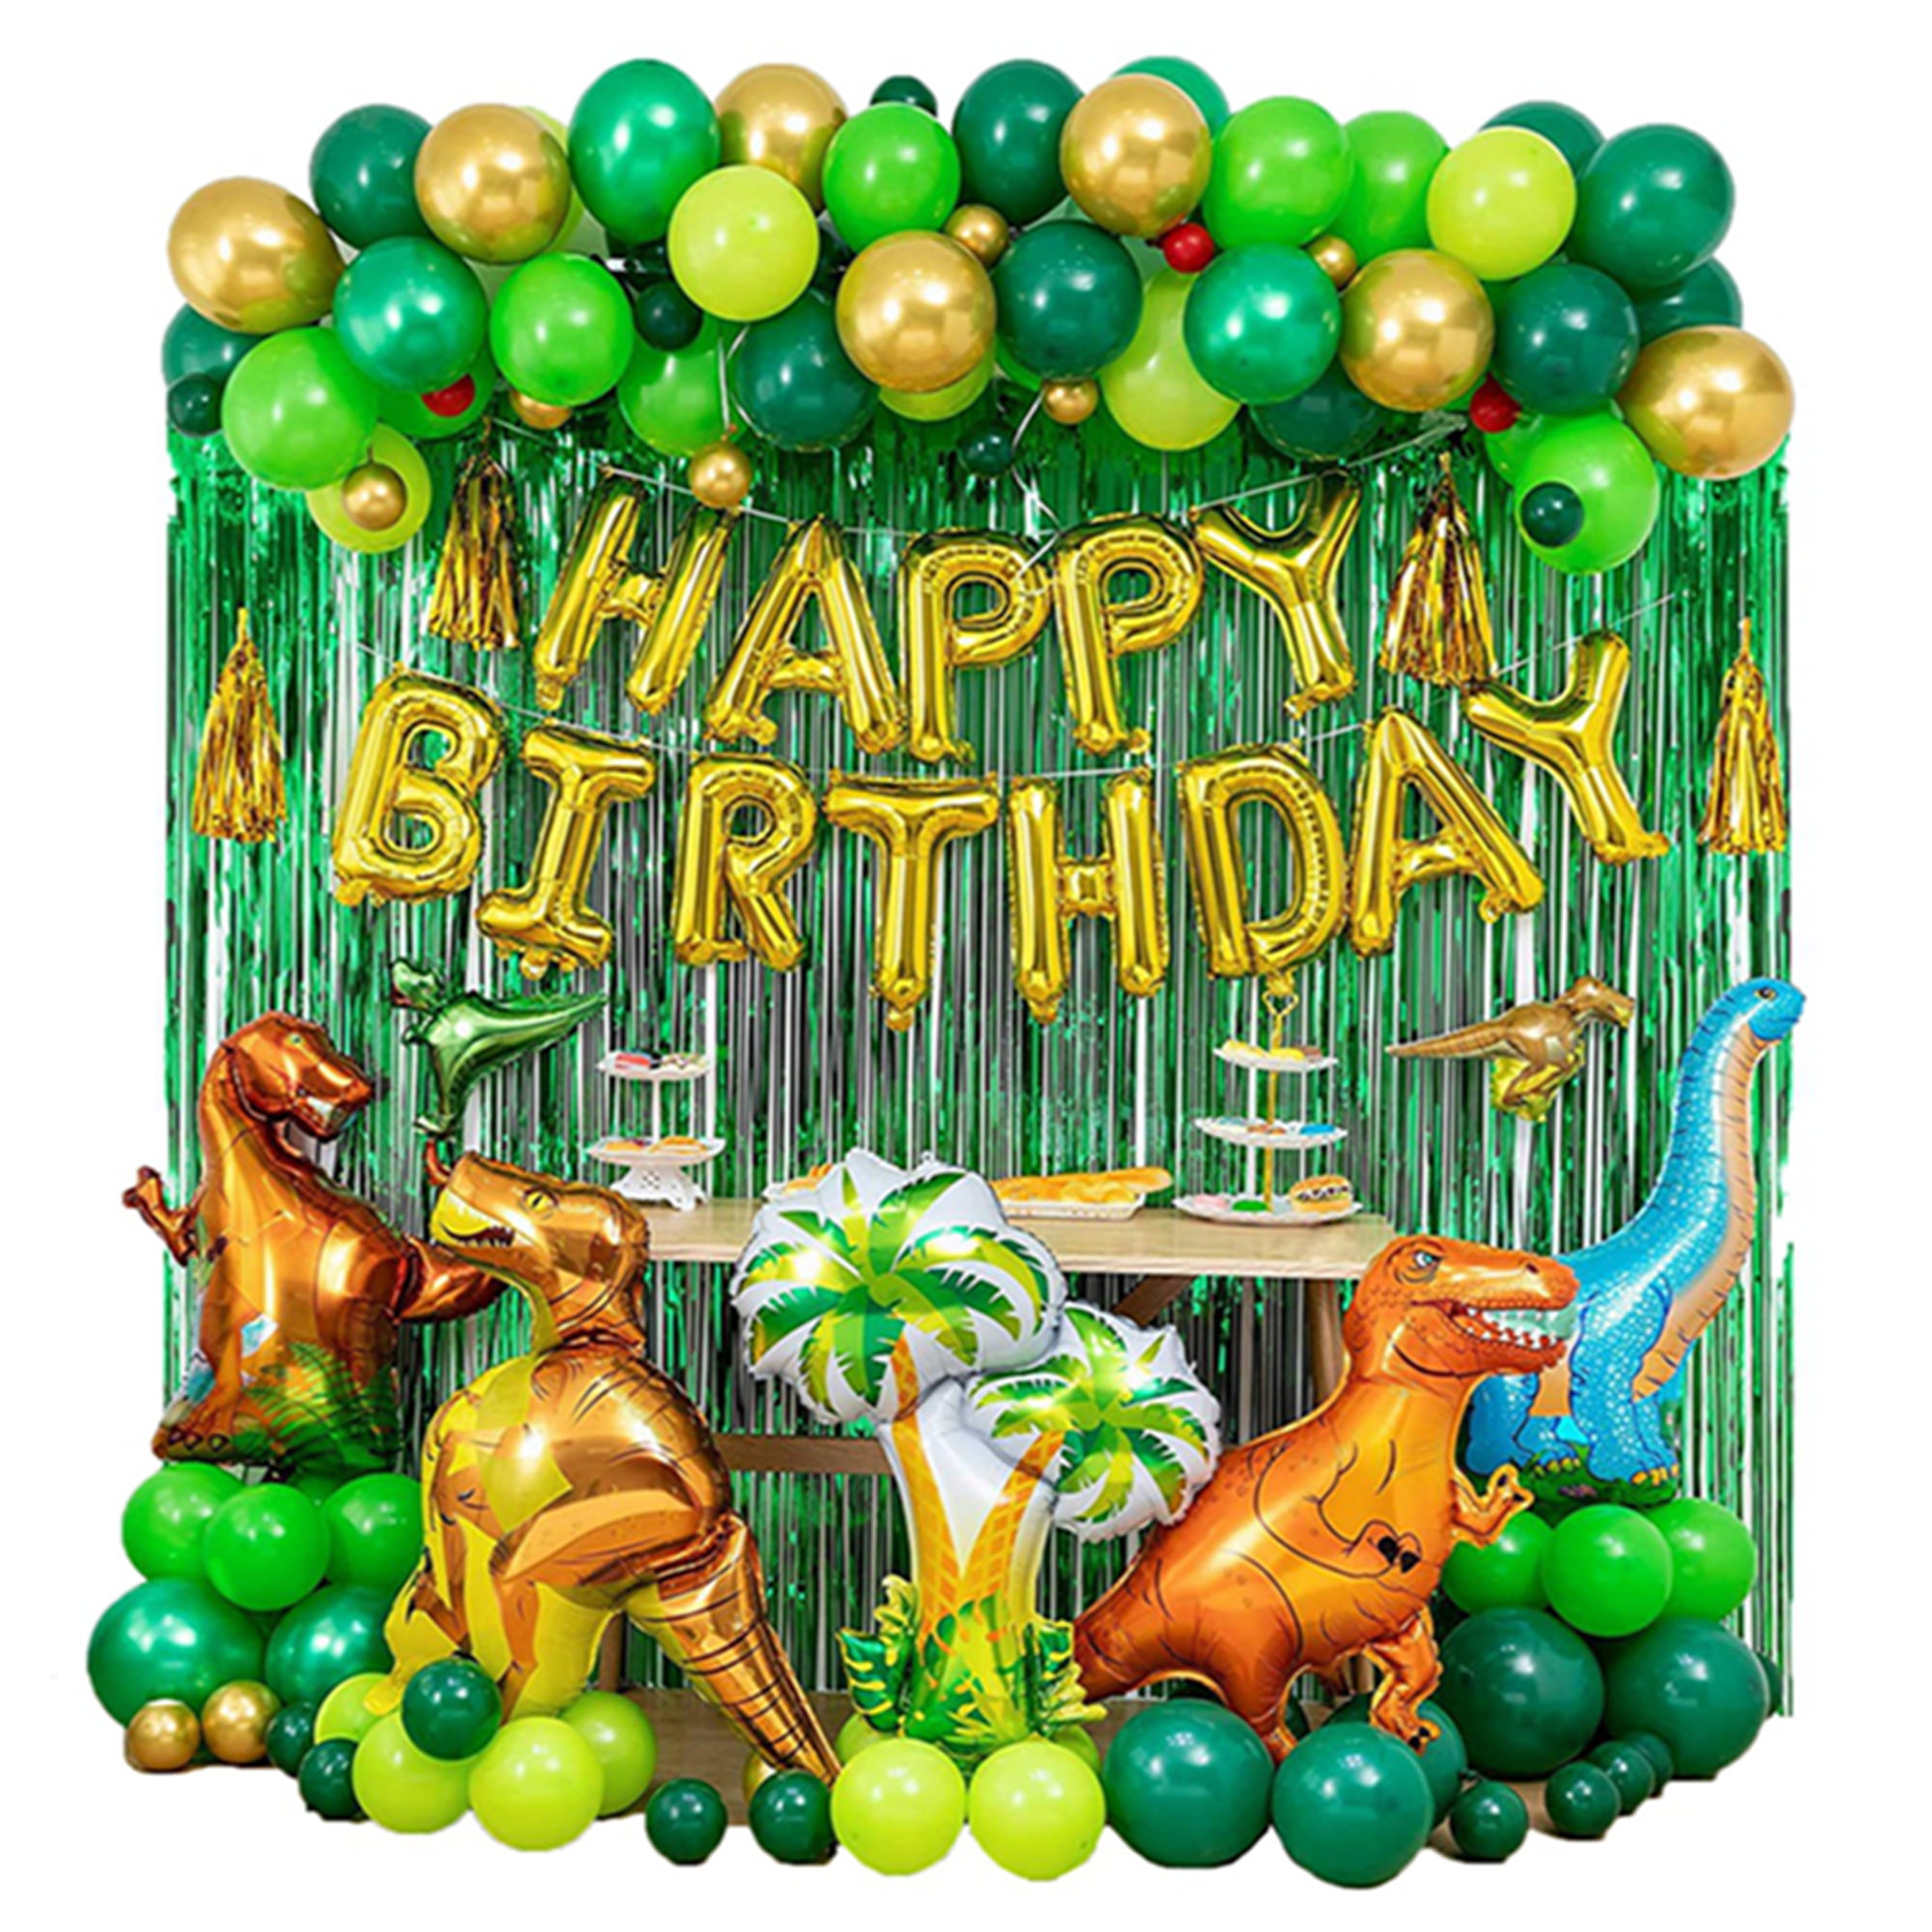 30 DINOSAUR BIRTHDAY PARTY BUBBLE LABELS FAVORS